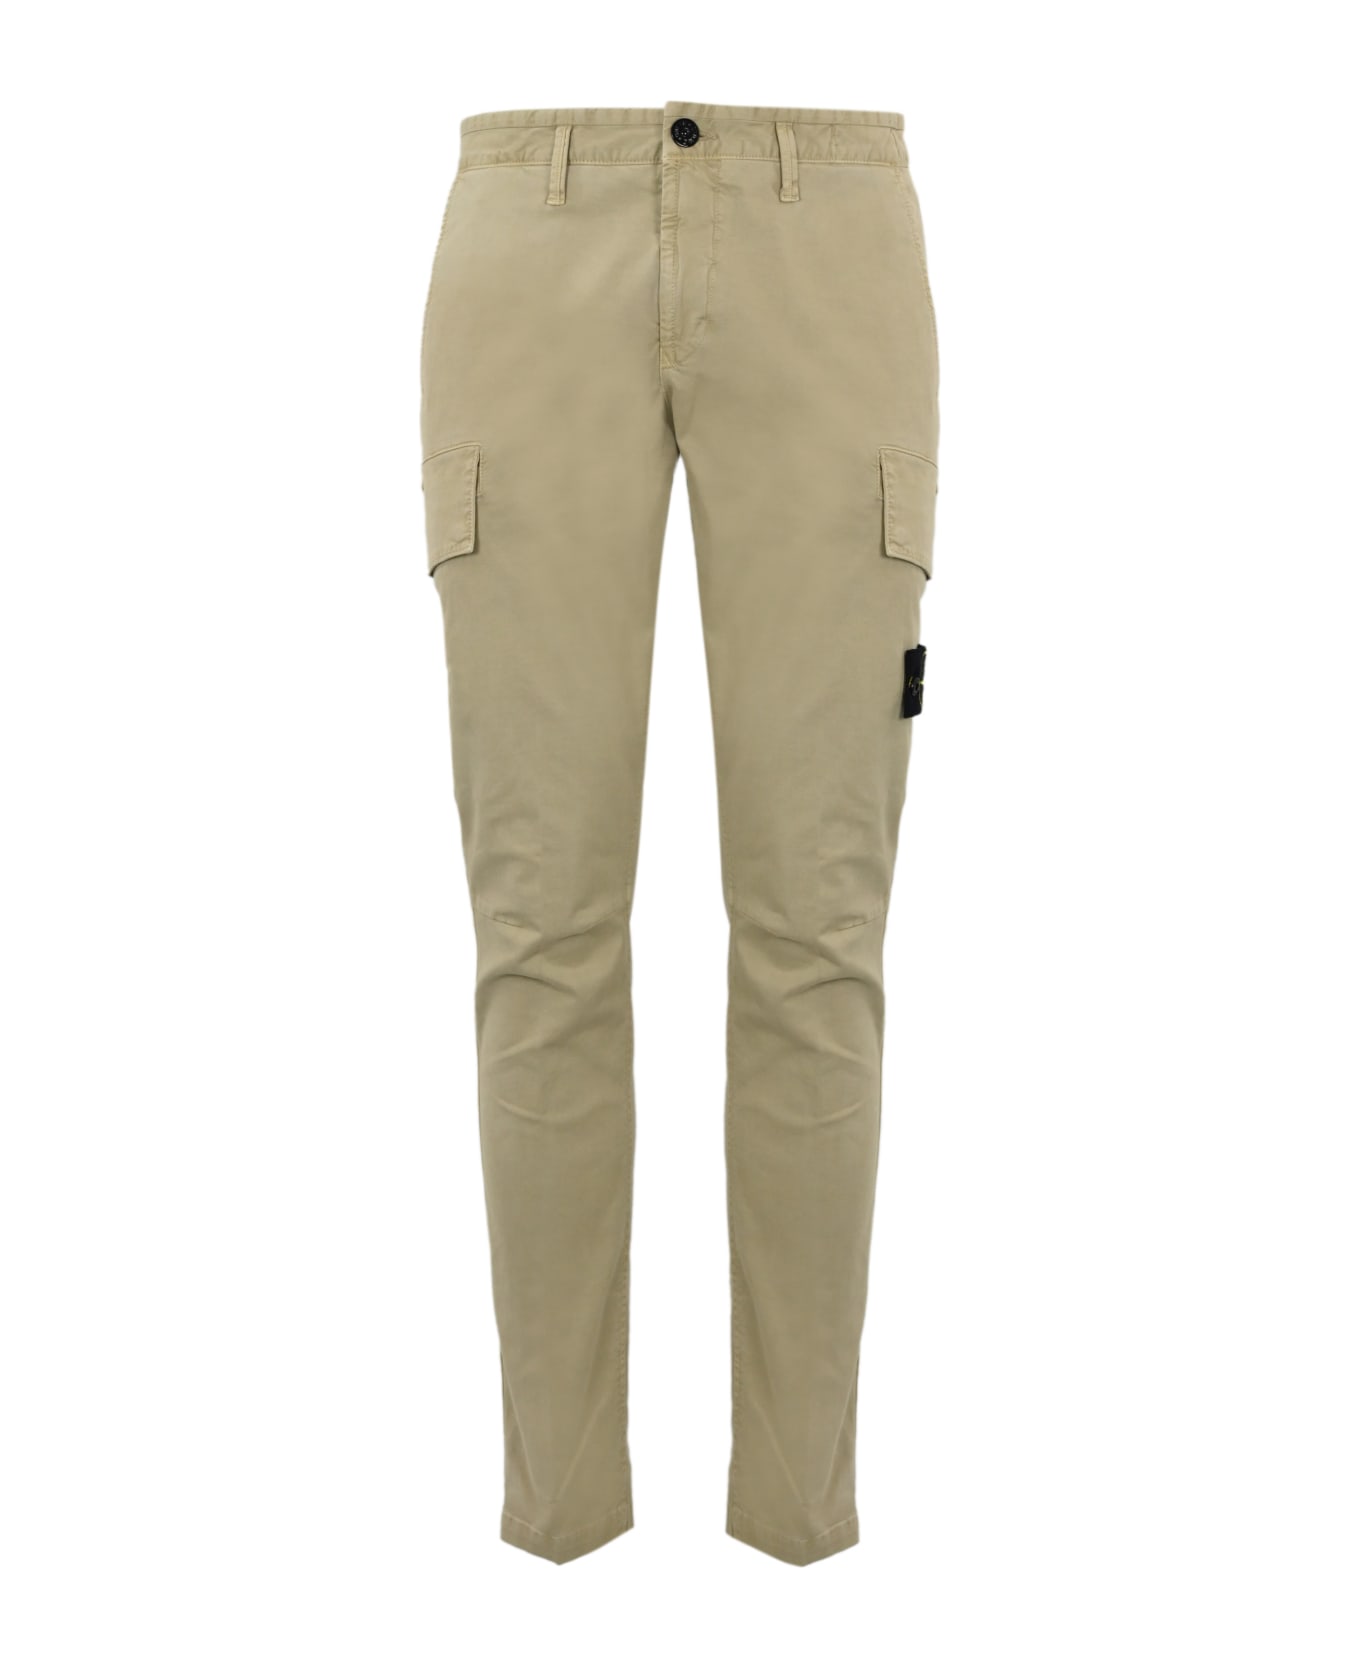 Stone Island Cargo Trousers 30604 Old Treatment - SAND ボトムス